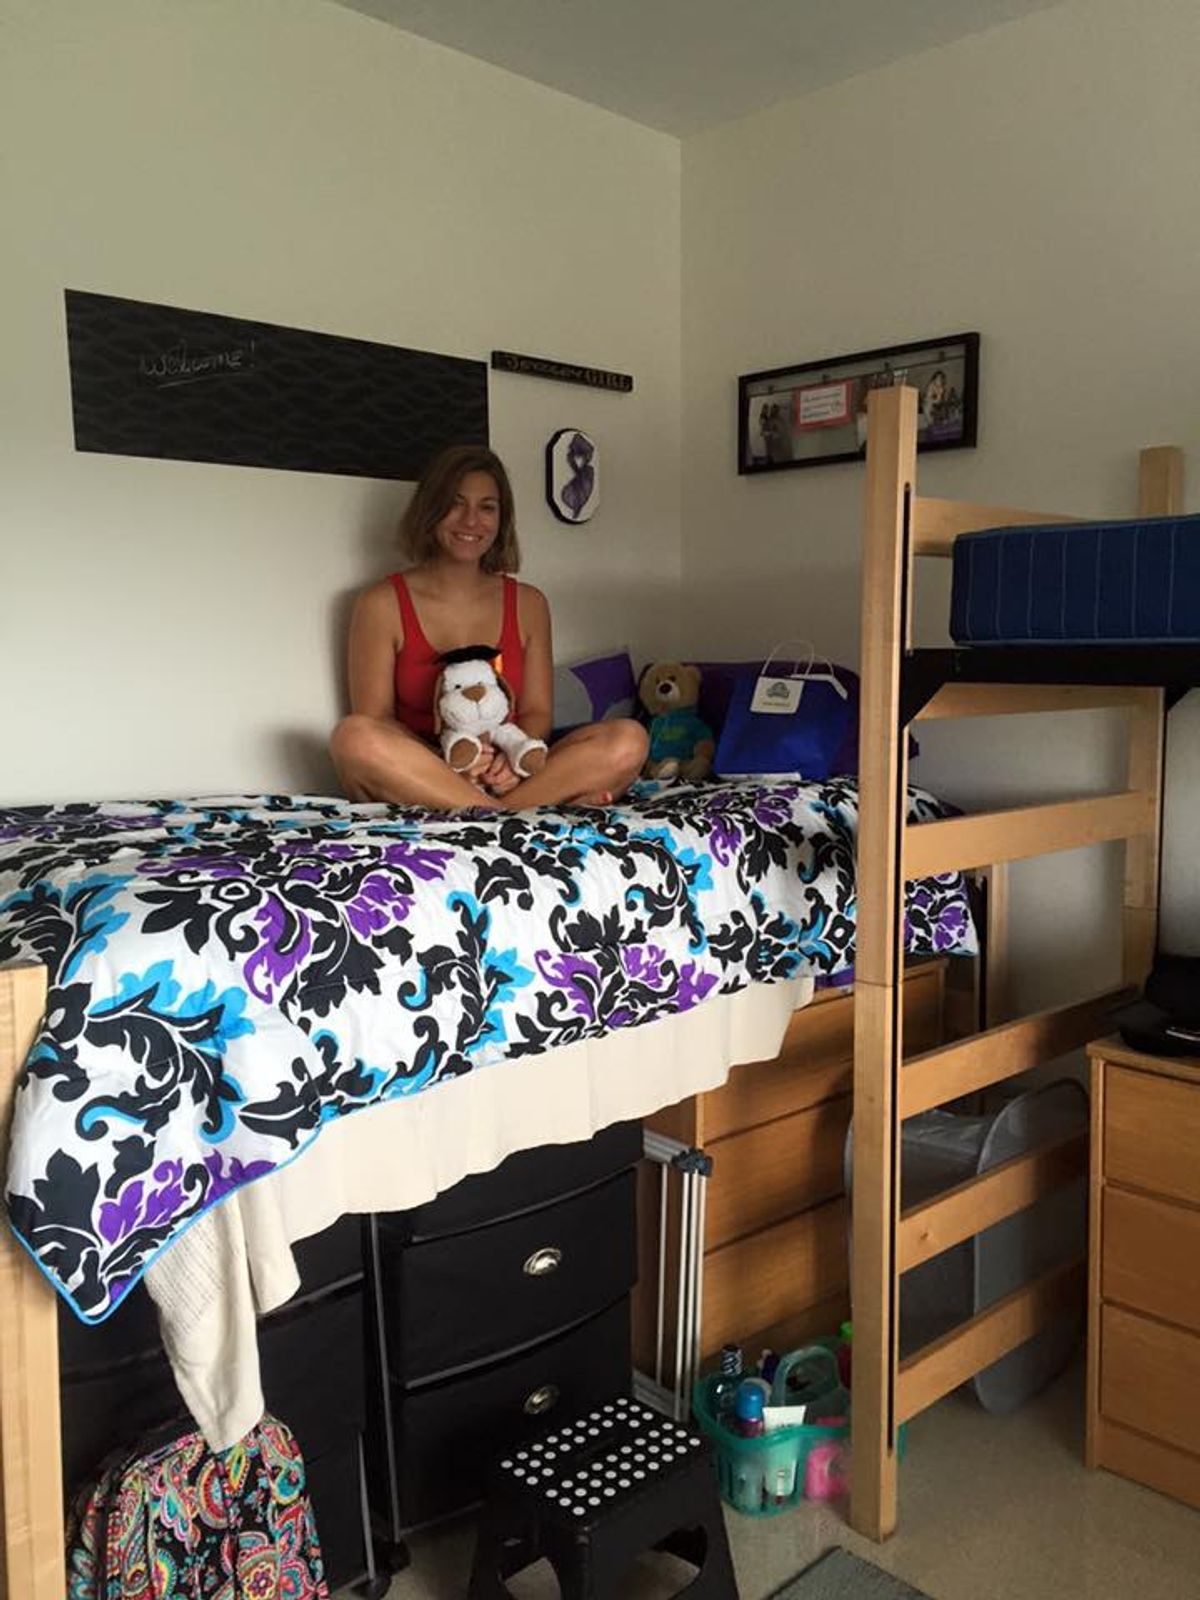 6 Things I Learned As An Only Child In A College Dorm